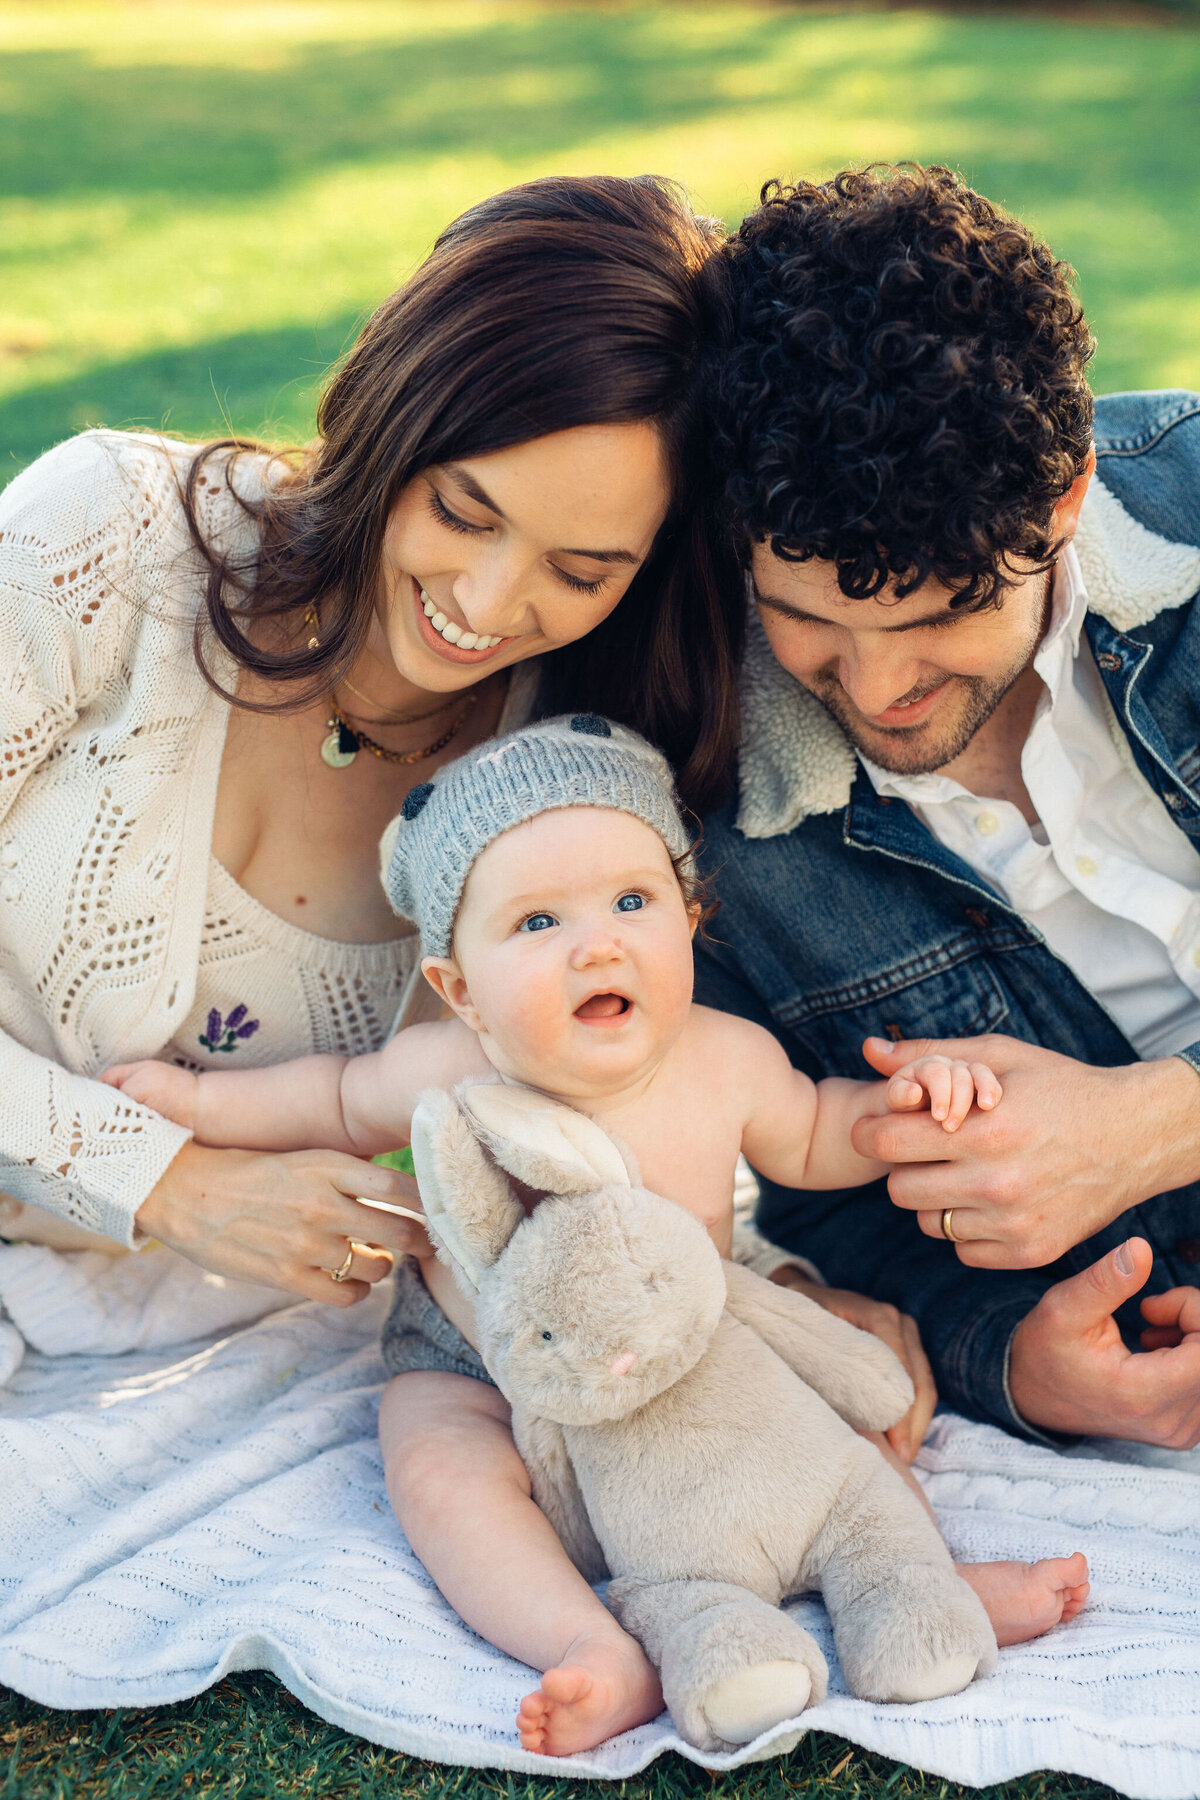 Family Portrait Photo Of Couple Smiling While Holding Their Baby In Topless Los Angeles